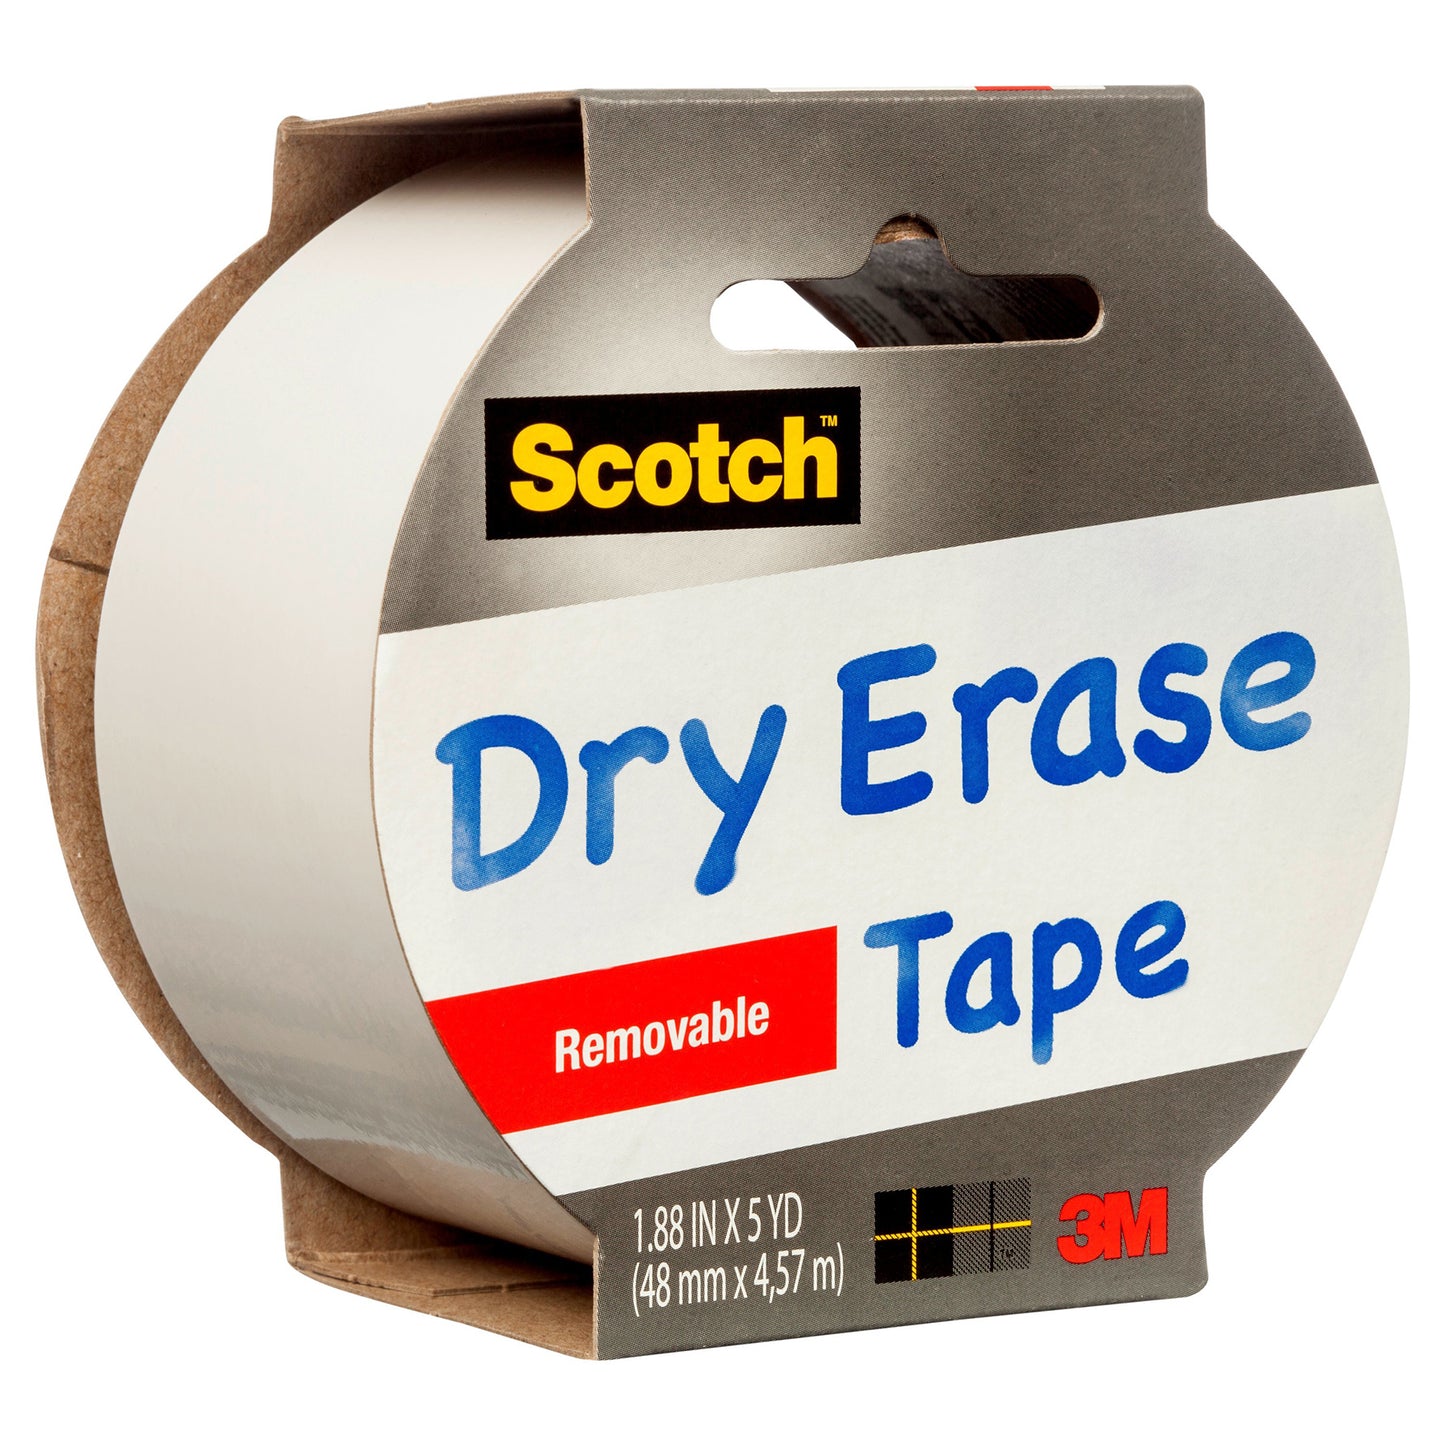 Dry Erase Tape, 1.88" x 5yd, Pack of 3